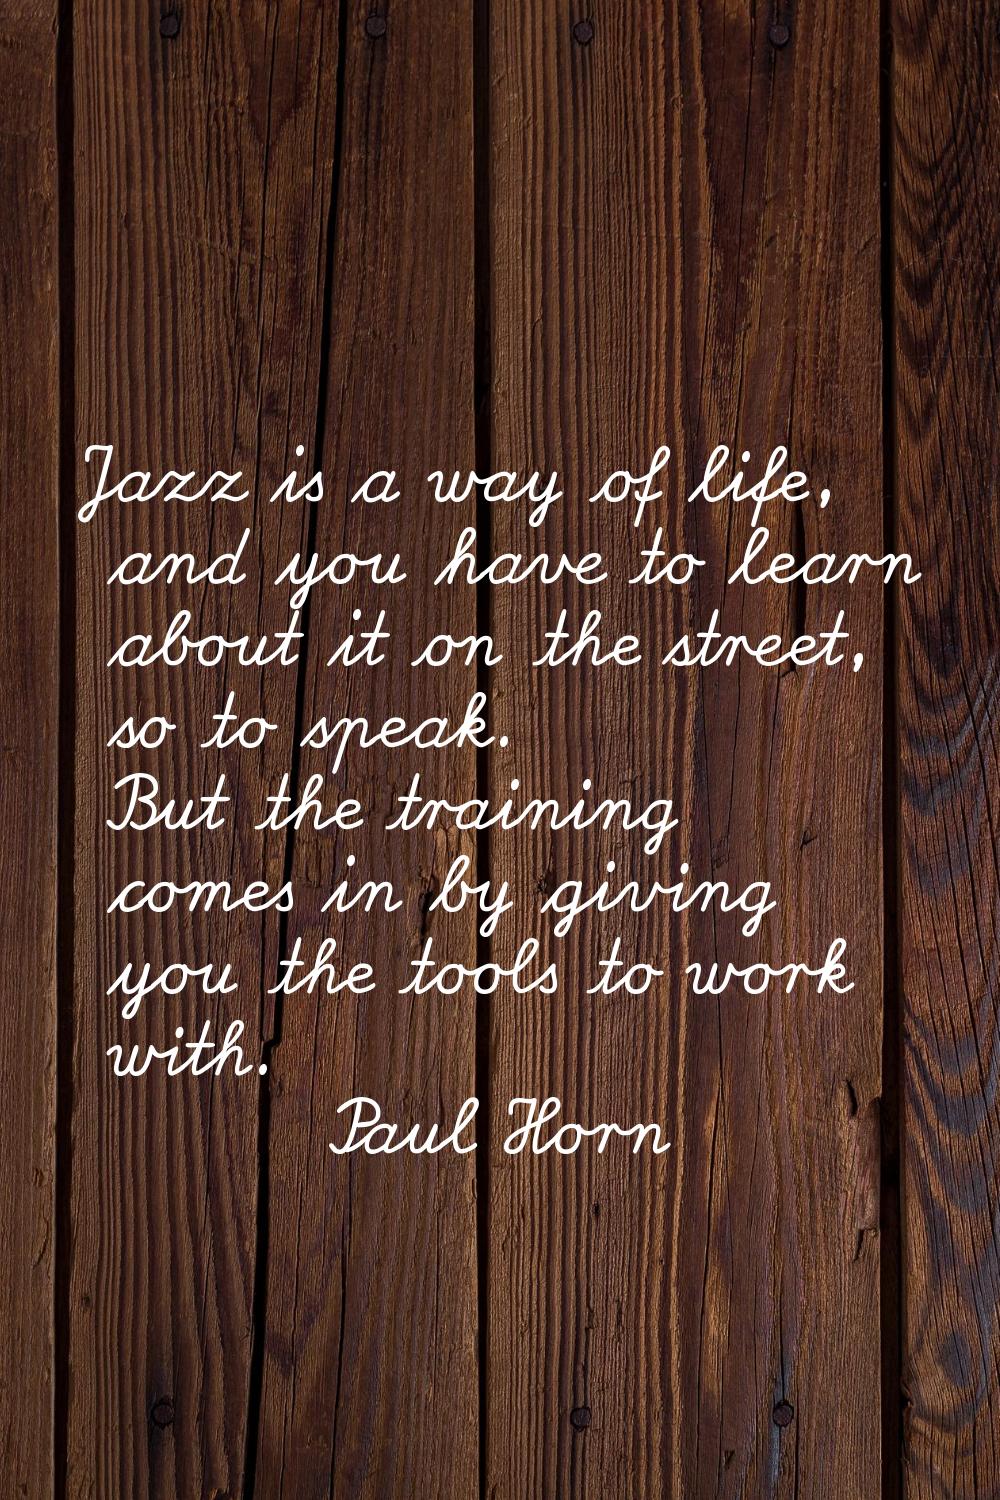 Jazz is a way of life, and you have to learn about it on the street, so to speak. But the training 